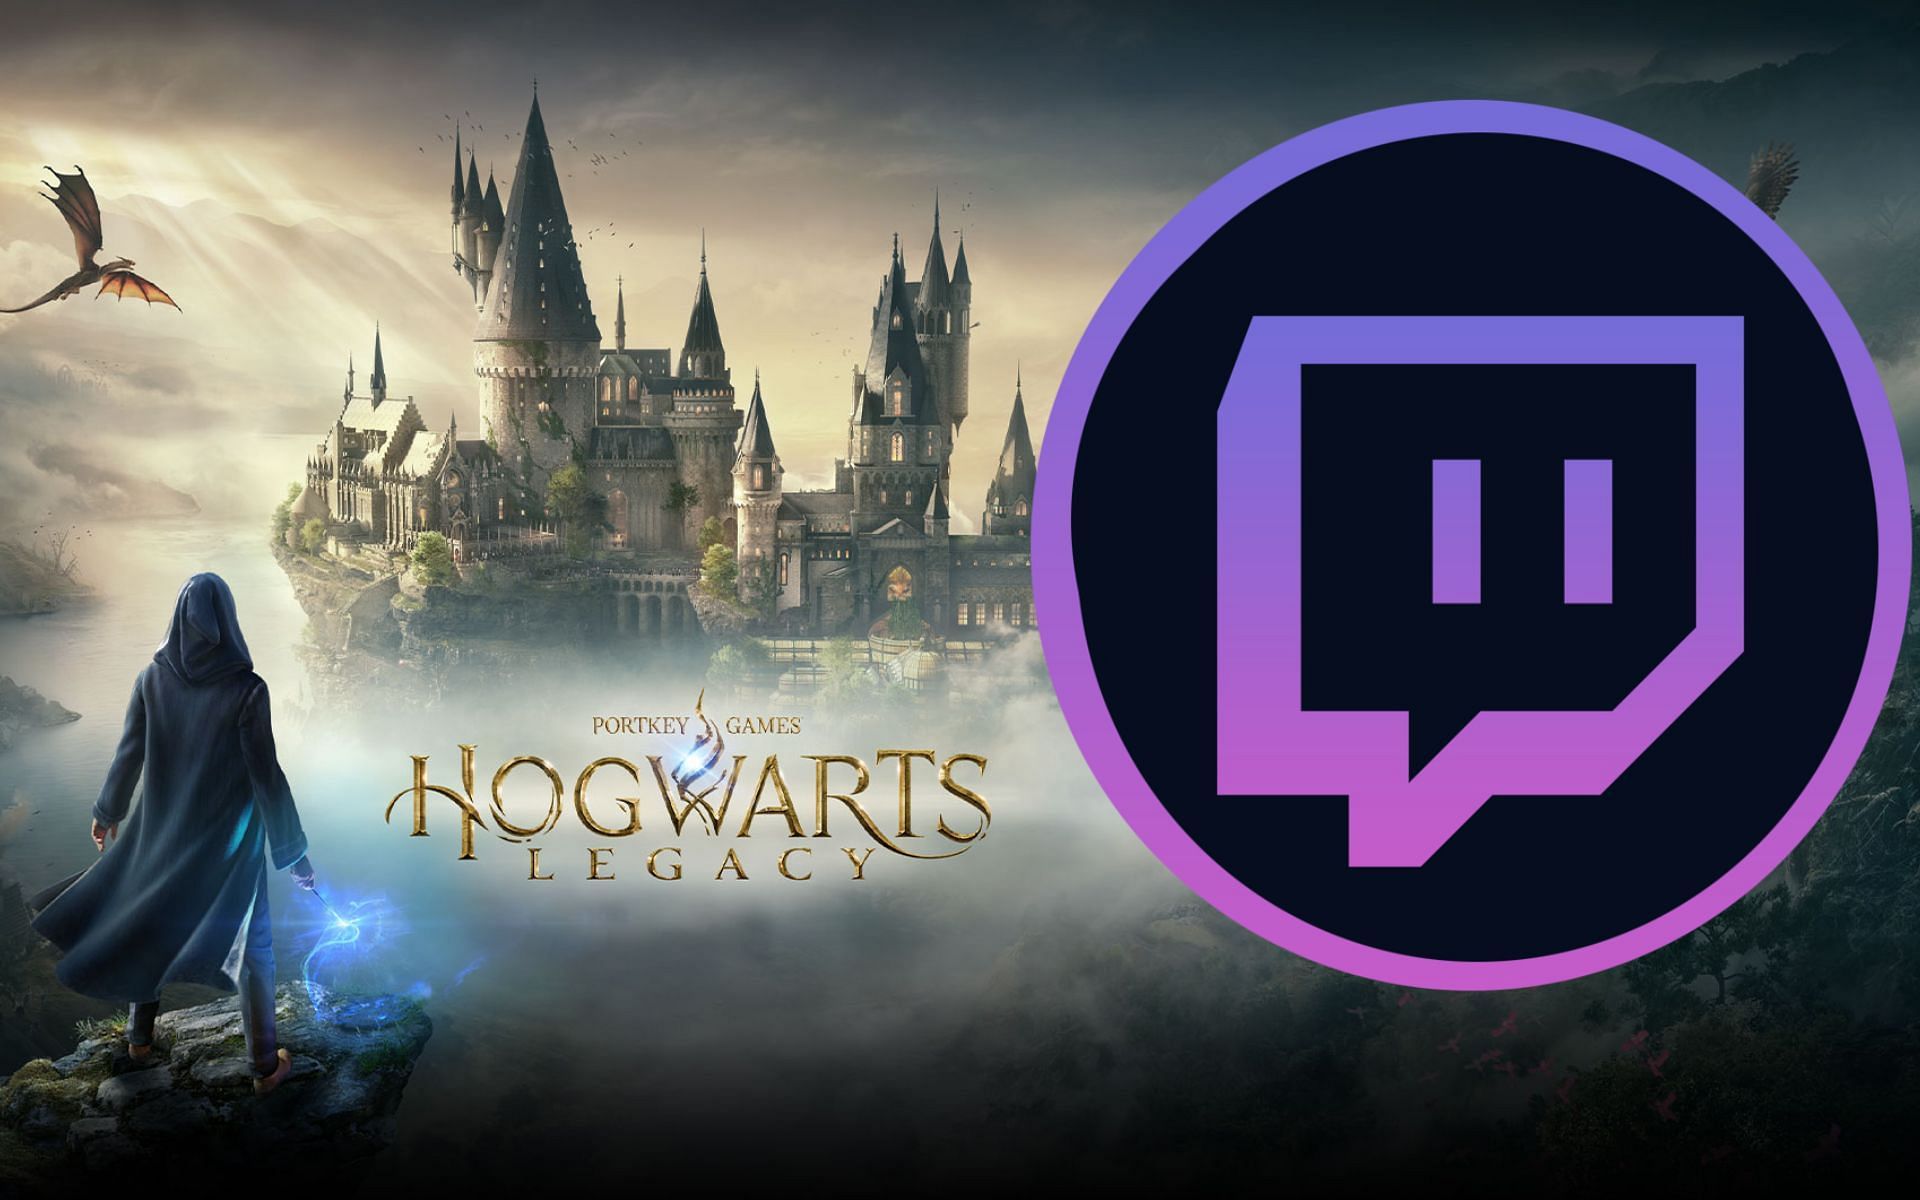 Twitch streamer ends in tears after Twitch chat harasses them for playing Hogwarts Legacy (Image via Sportskeeda)